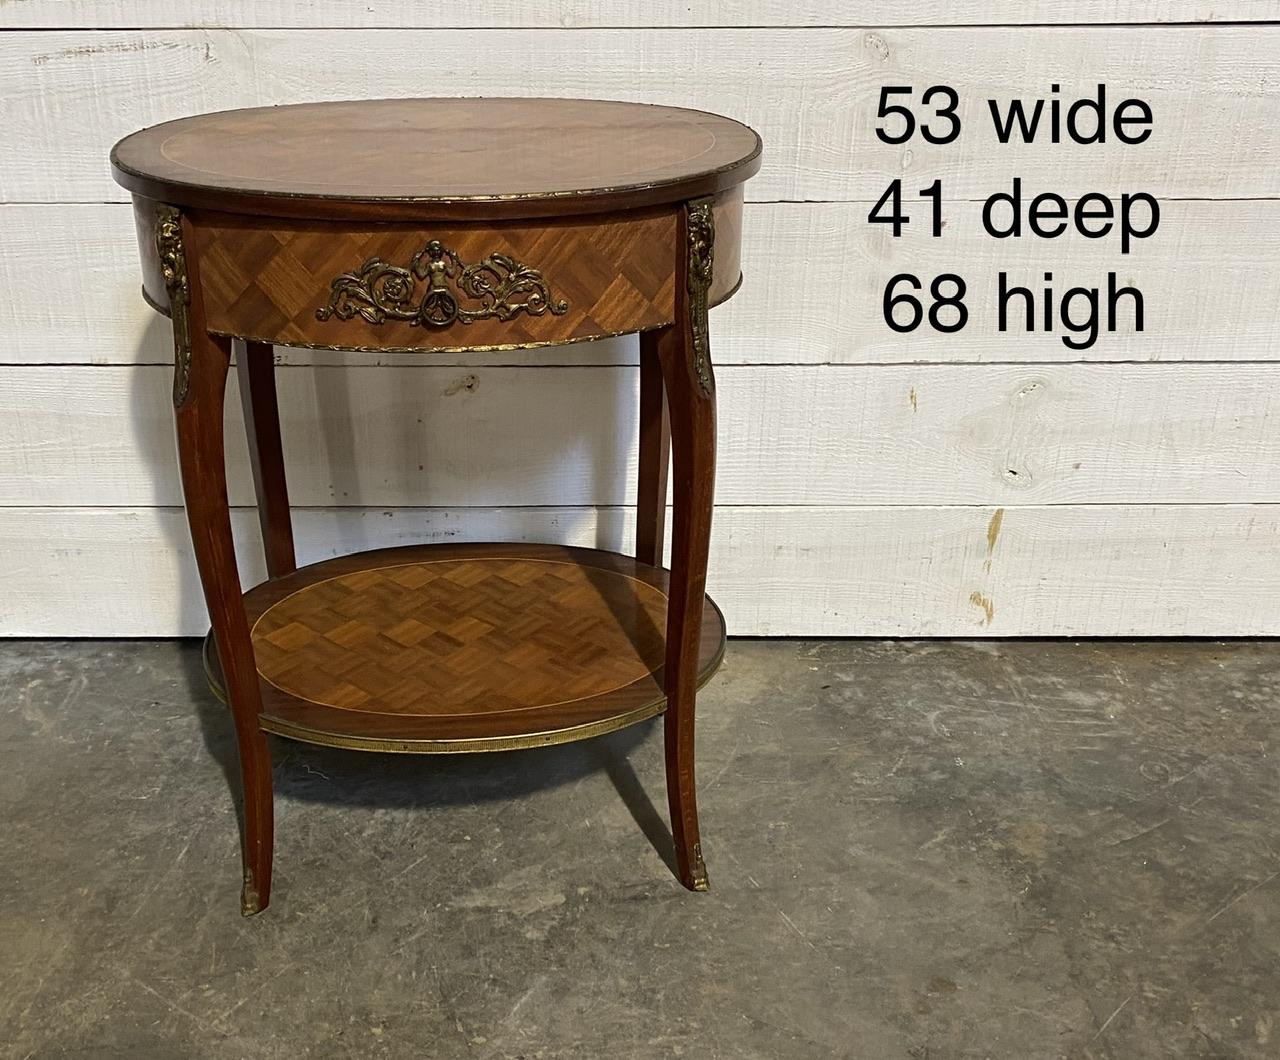 A pretty French lamp or occasional table, made from mahogany with nice mounts and a single drawer to the front.
In excellent original condition for the home.
Measures: Width 53 cm
Depth 41 cm
Height 68 cm.